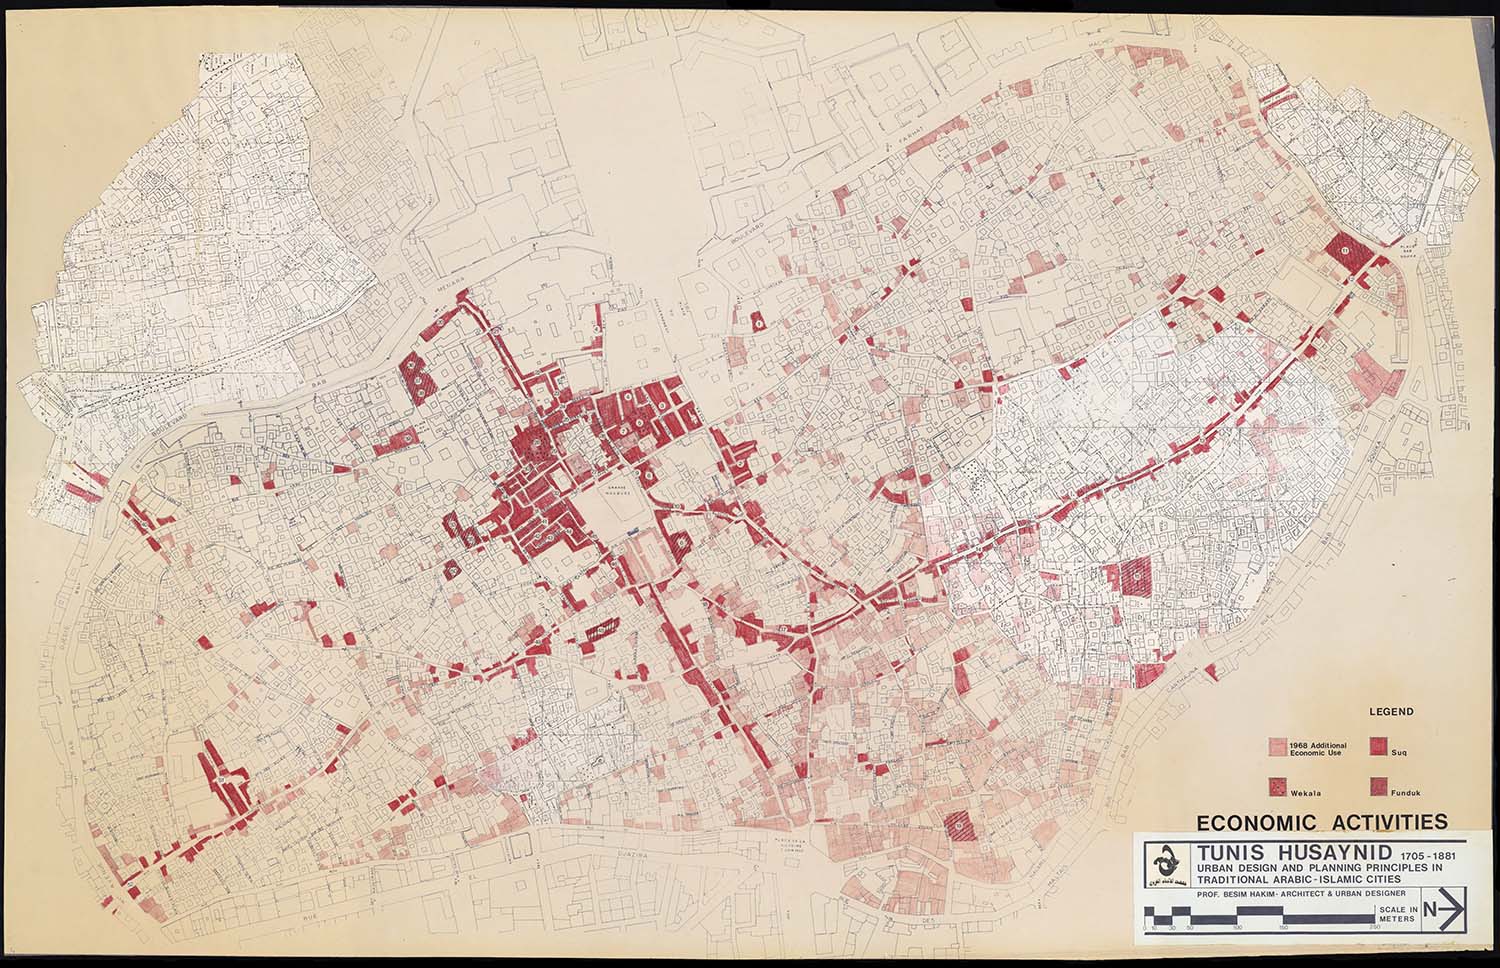 Tunis  - Map of historic center of Tunis showing economic activities. The locations of suqs (markets), waqalas (caravanserais), fundqus (inns) are indicated. Scale: 1:1,000 m. This map is part of a&nbsp;<a href="https://archnet.org/collections/1762" target="_blank" data-bypass="true">series of maps</a><span style="text-align: justify;">&nbsp;titled "Tunis Husaynid (1705-1881): Urban Design and Planning Principles in Traditional Arabic-Islamic Cities." Produced by Besim S. Hakim.</span>